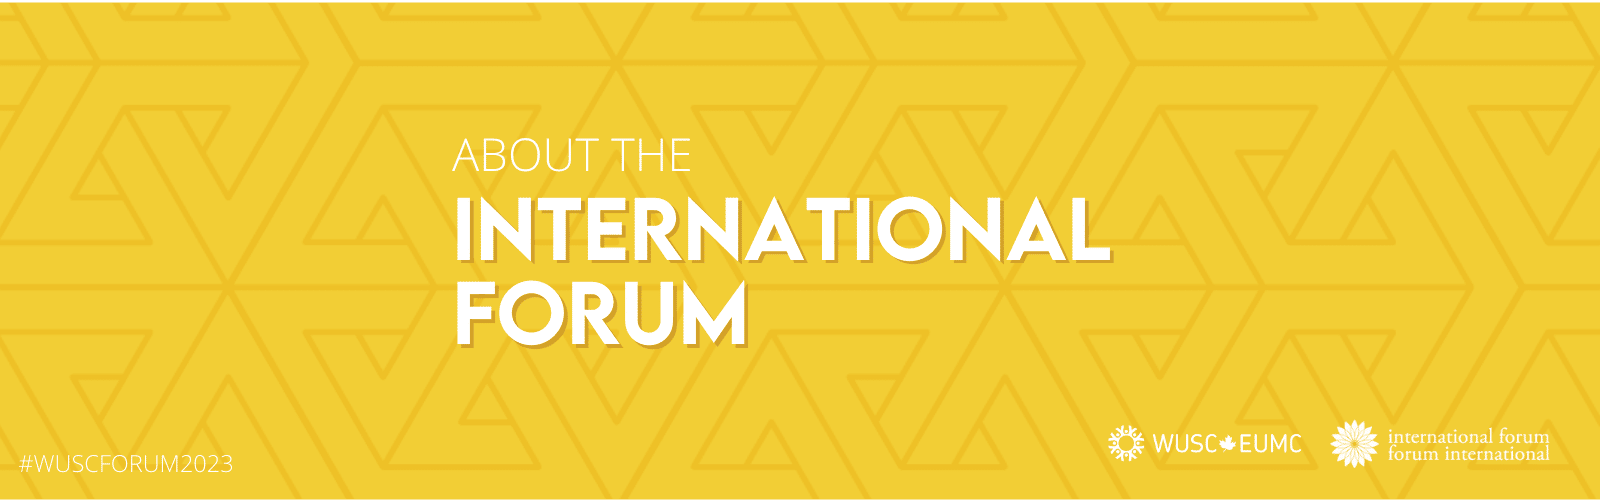 About the International Forum